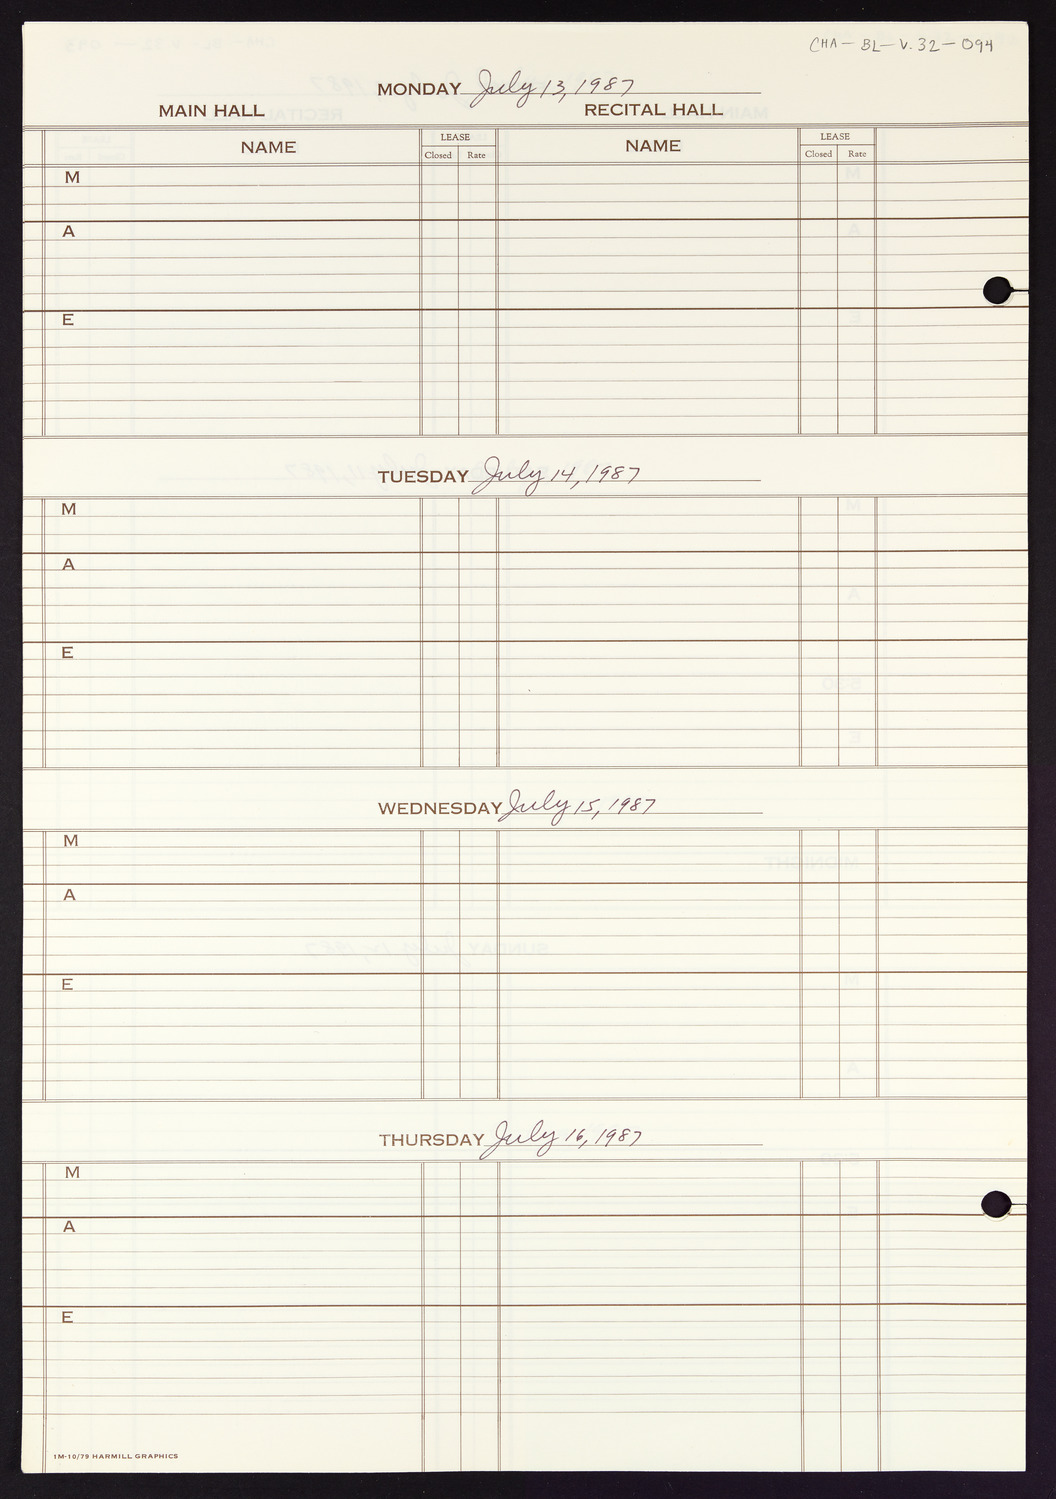 Carnegie Hall Booking Ledger, volume 32, page 94